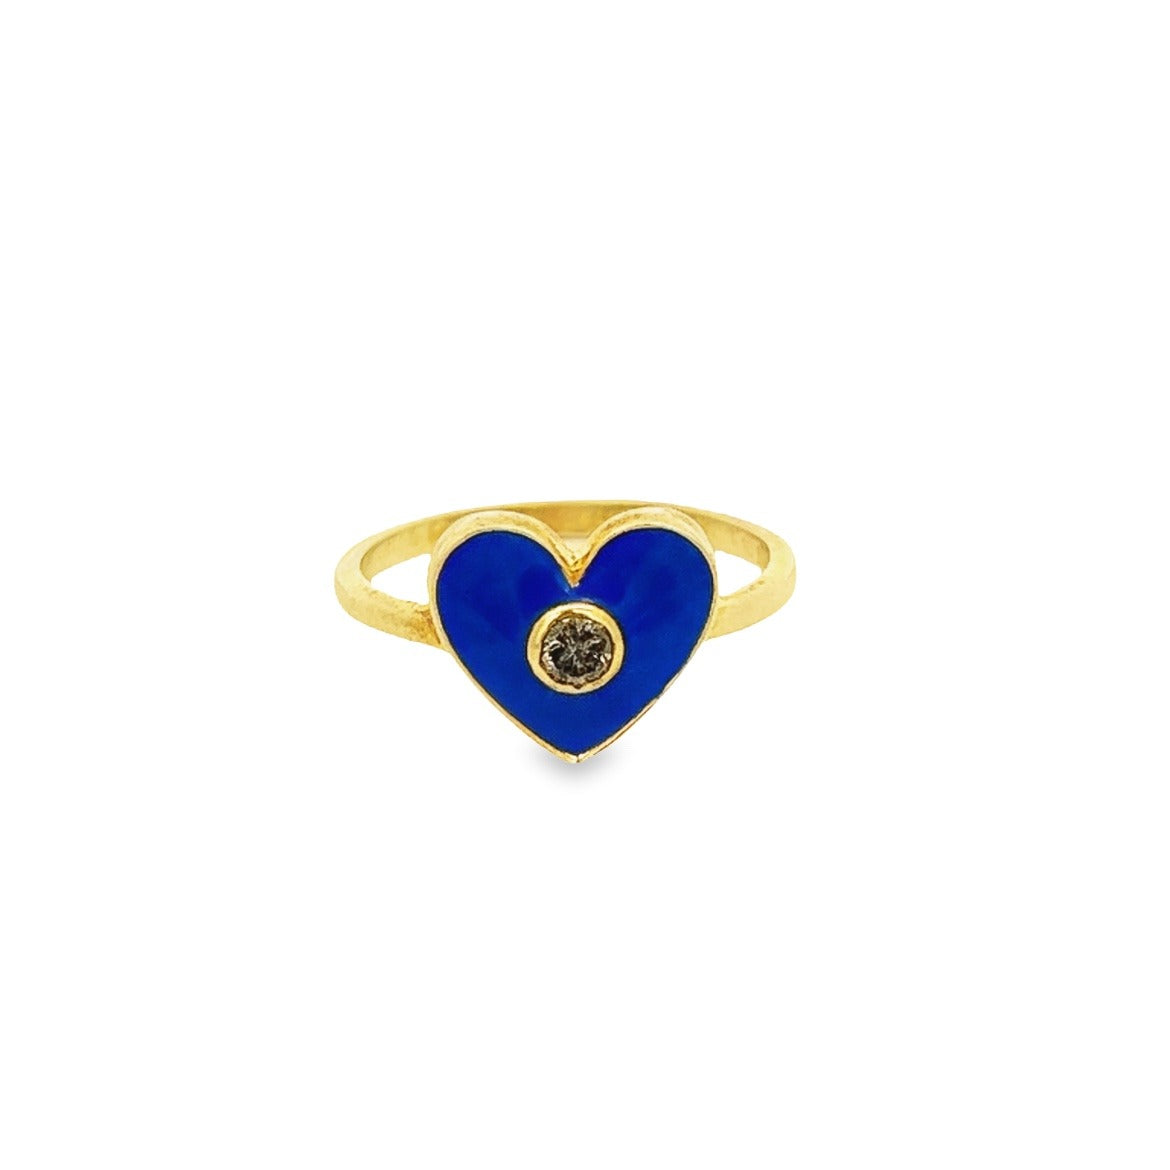 925 SILVER GOLD PLATED BLUE ENAMEL HEART RING